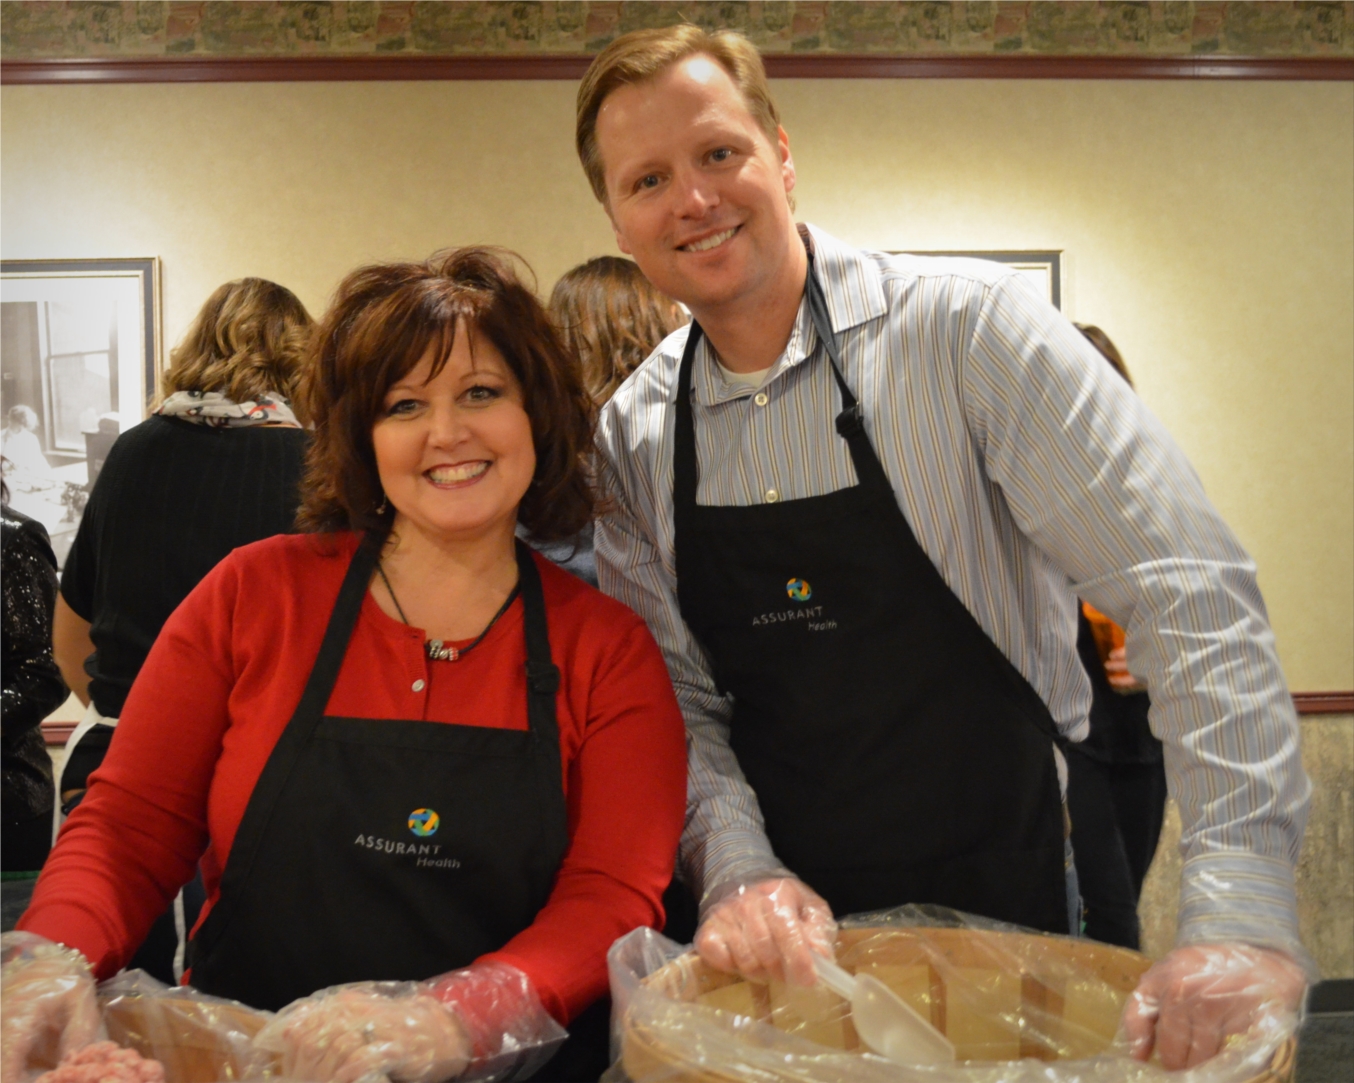 Assurant Health leaders host a gourmet popcorn bar for employees at the company’s annual holiday reception. From left: Pam Entringer, Jim Frelka